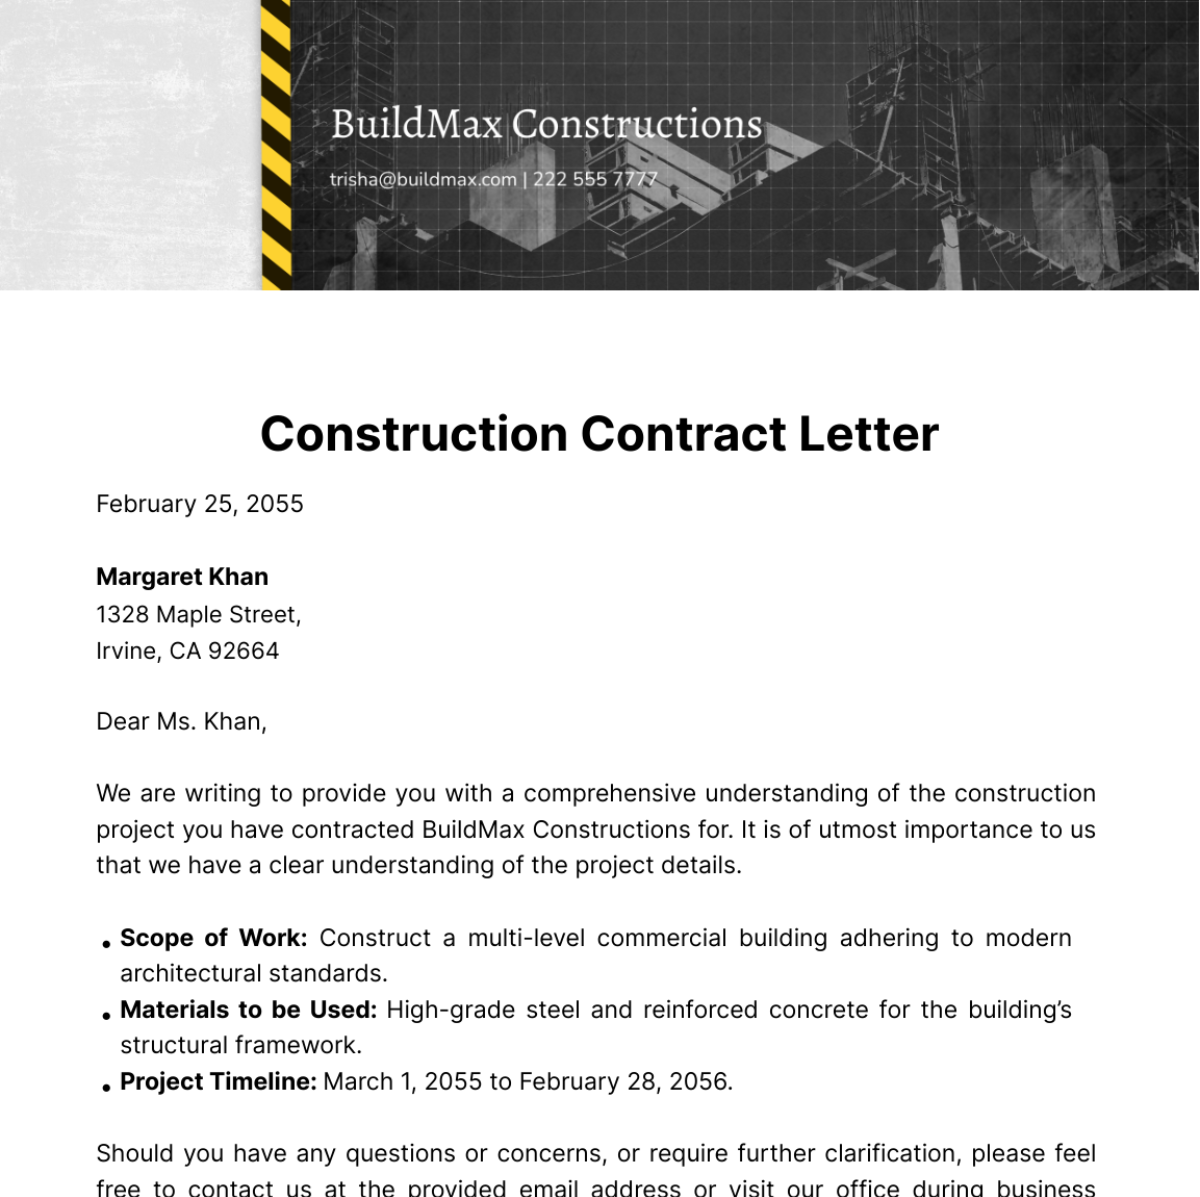 Construction Contract Letter Template